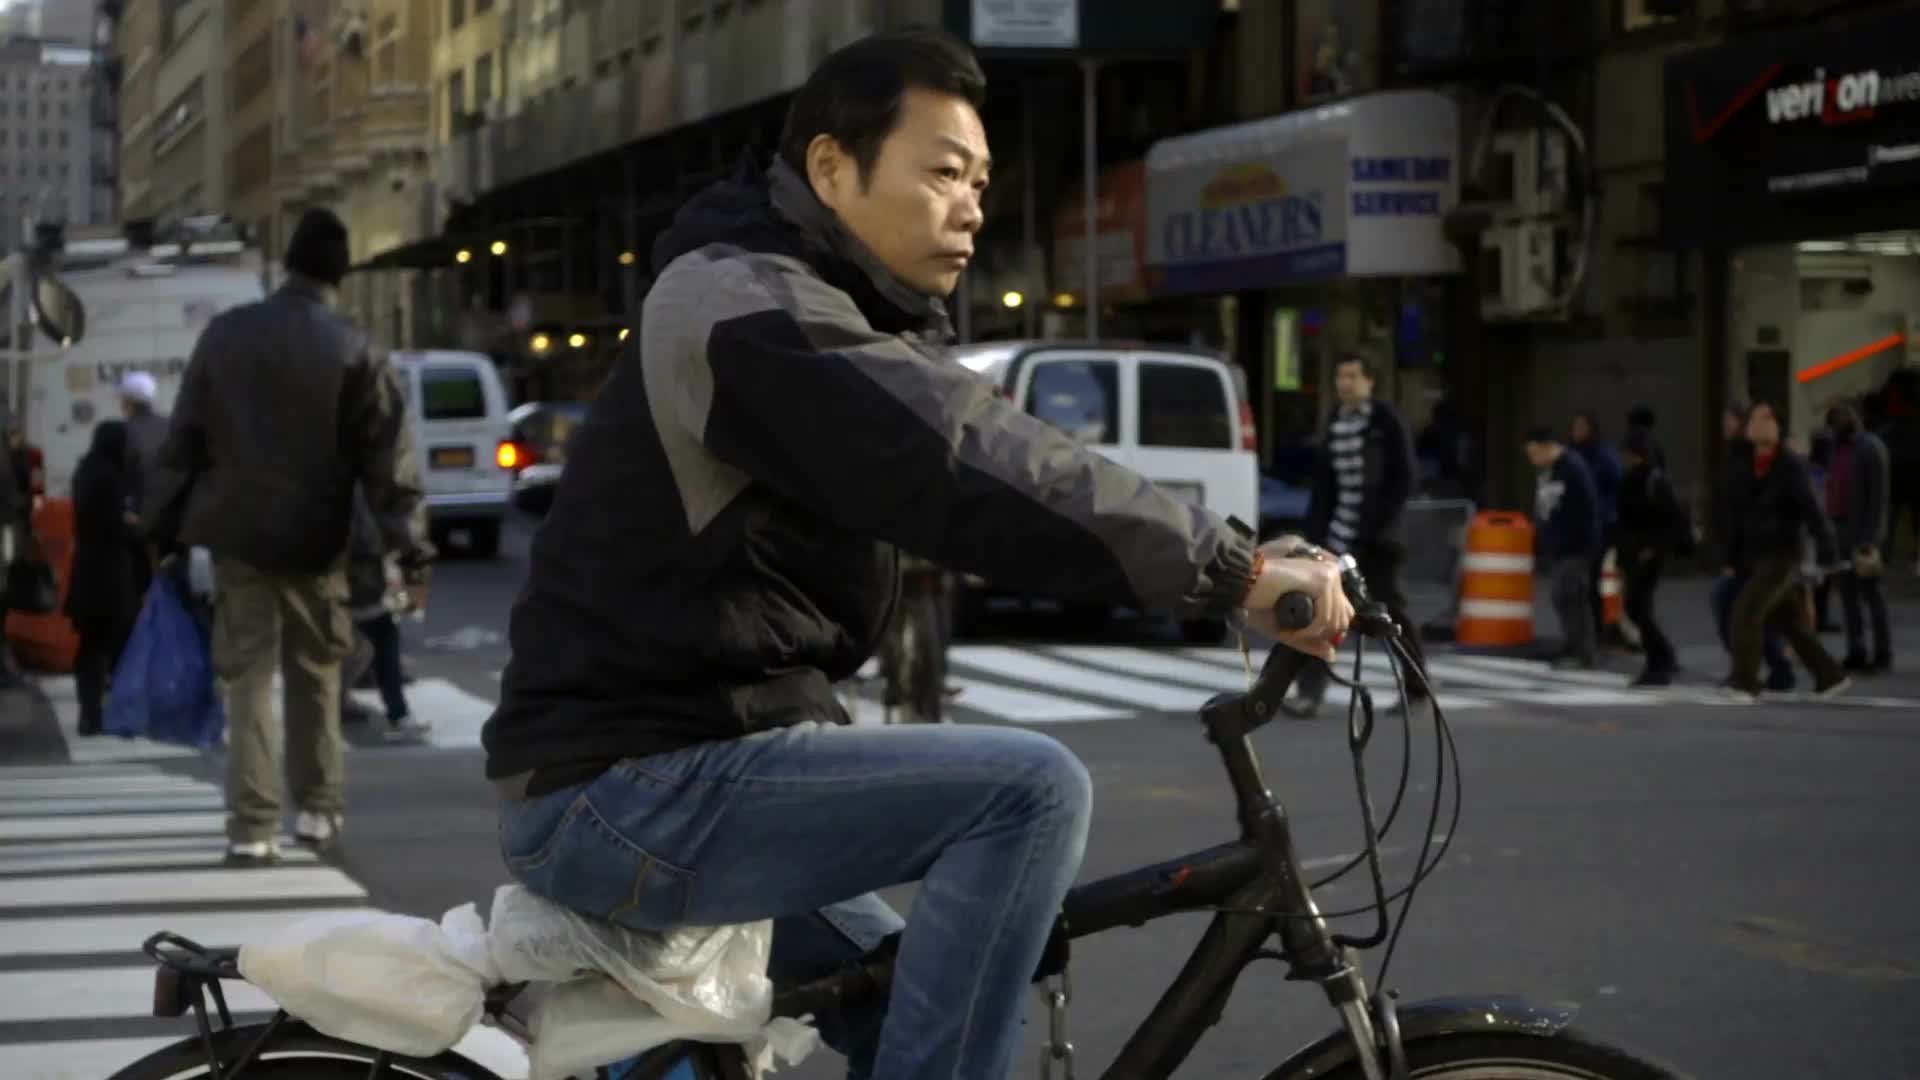 man on bicycle riding in street on fall day in Manhattan NYC - slow motion